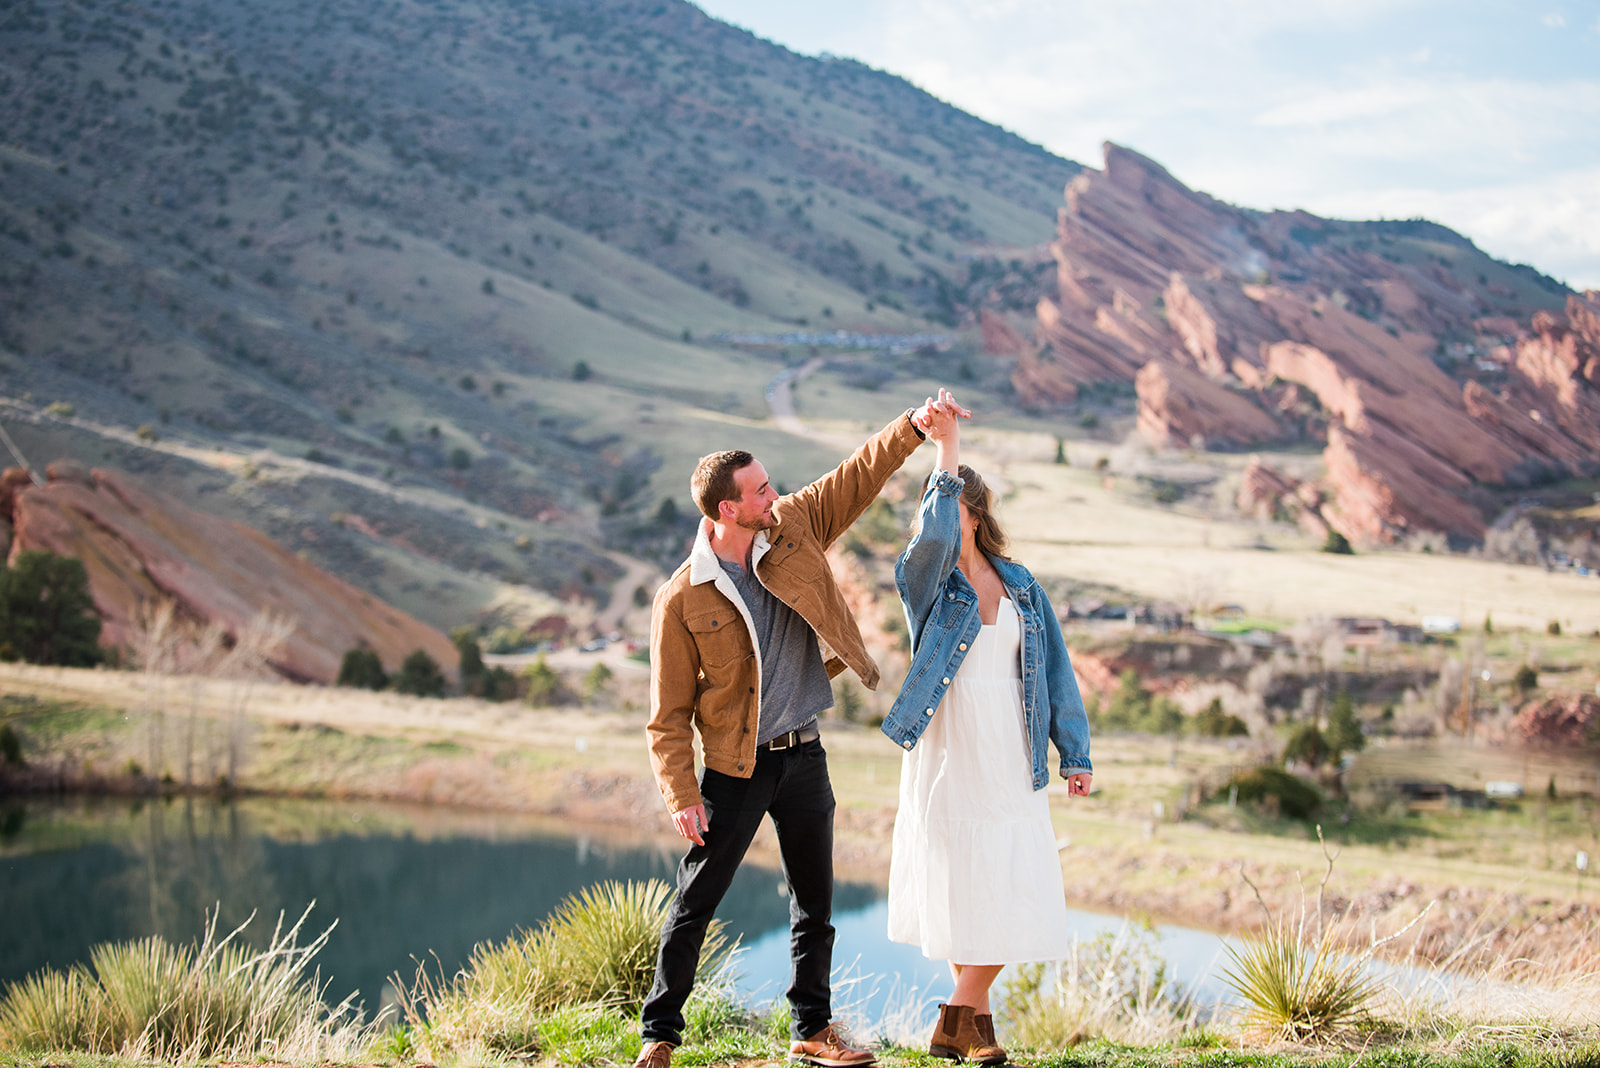 Man twirls his fiancée in front of a lake and red rocks at Mount Falcon Colrado.